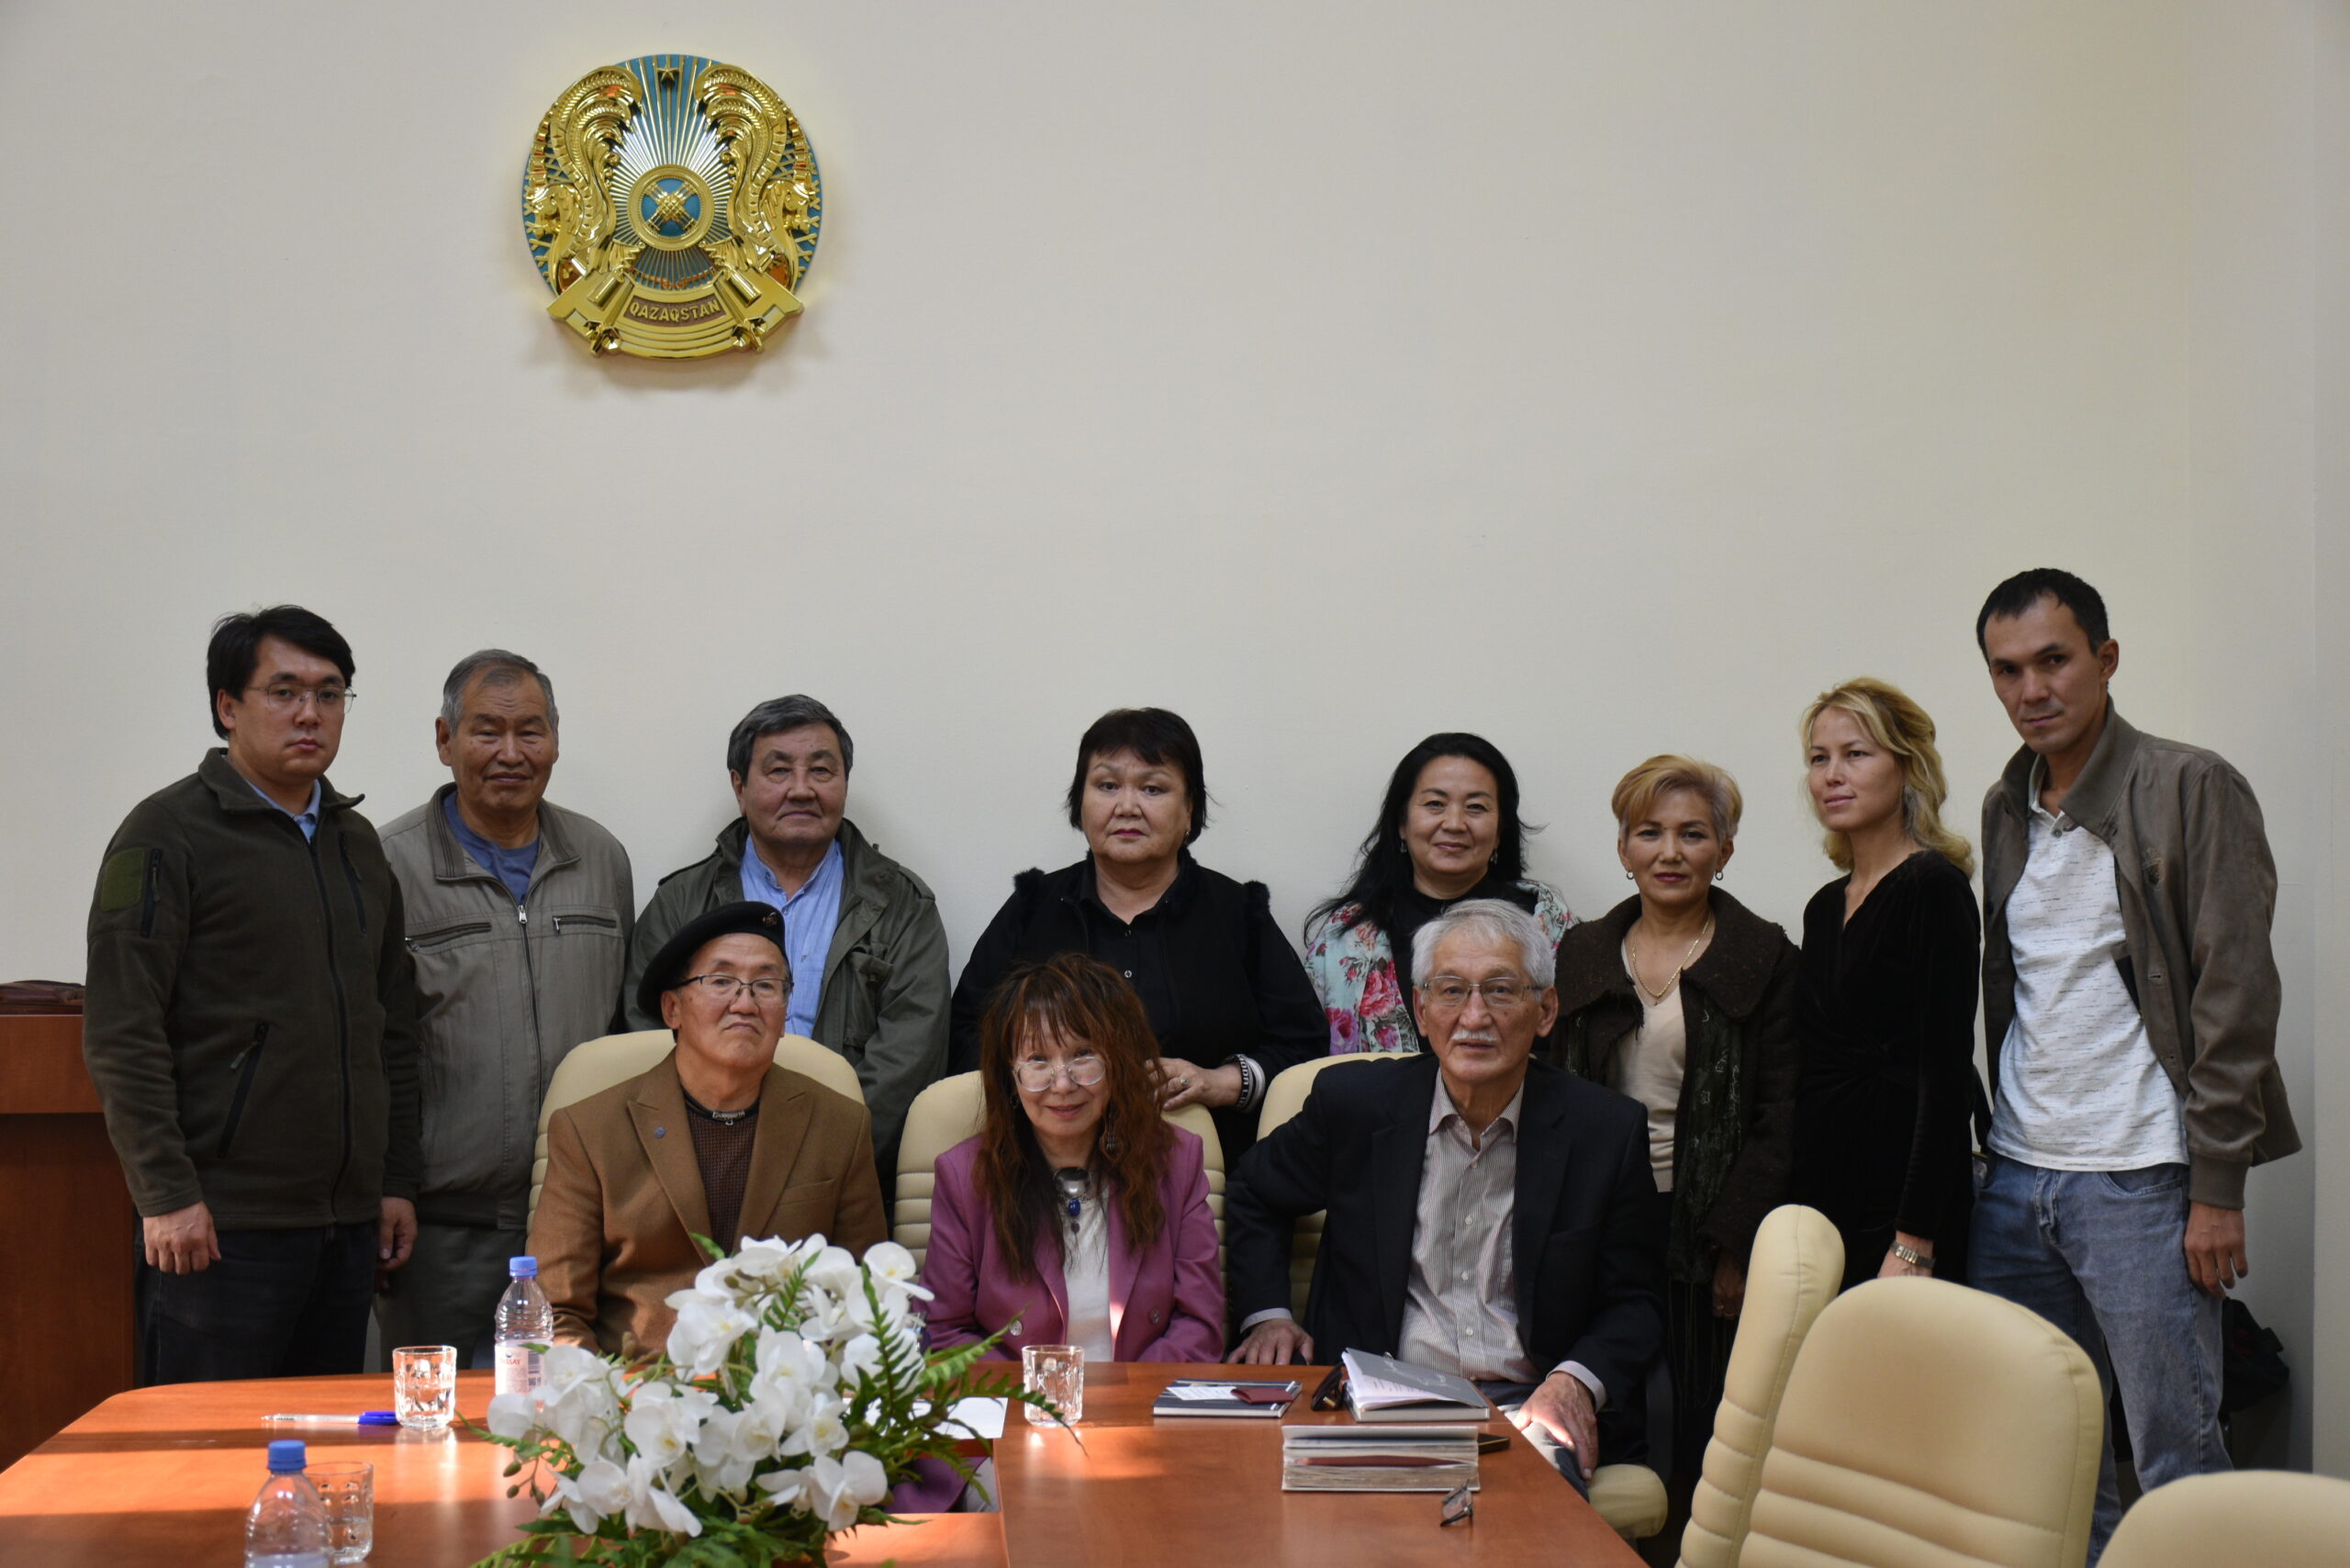 MEETING-SEMINAR WITH FIGURES OF SCIENCE AND CULTURE OF THE REPUBLIC OF SAKHA (RUSSIA, YAKUTIA)